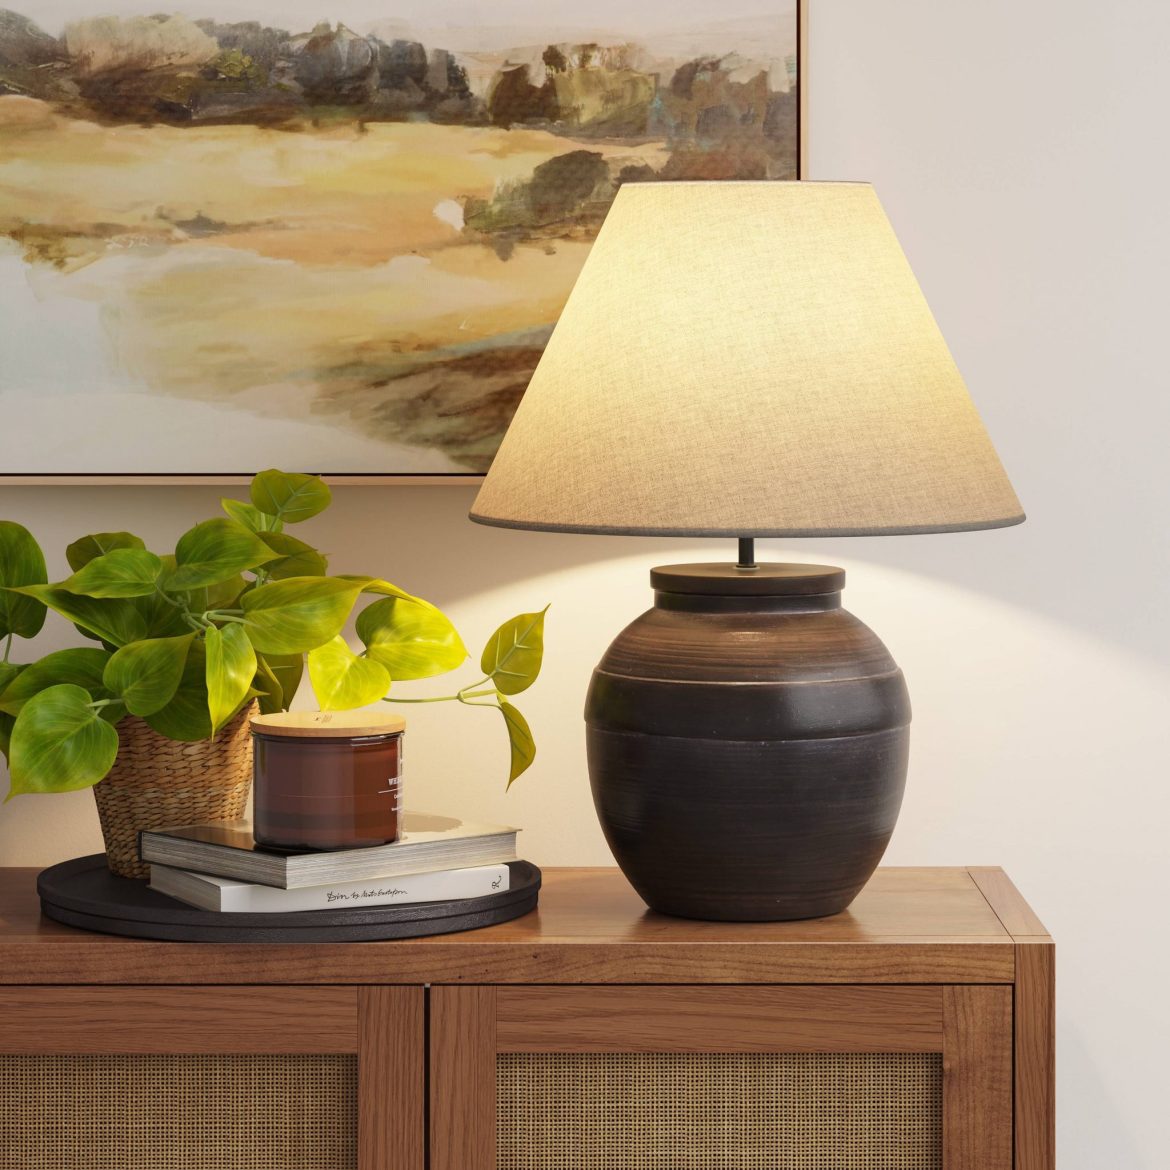 Designer Lamps: The Perfect Addition to Your Living Room Decor